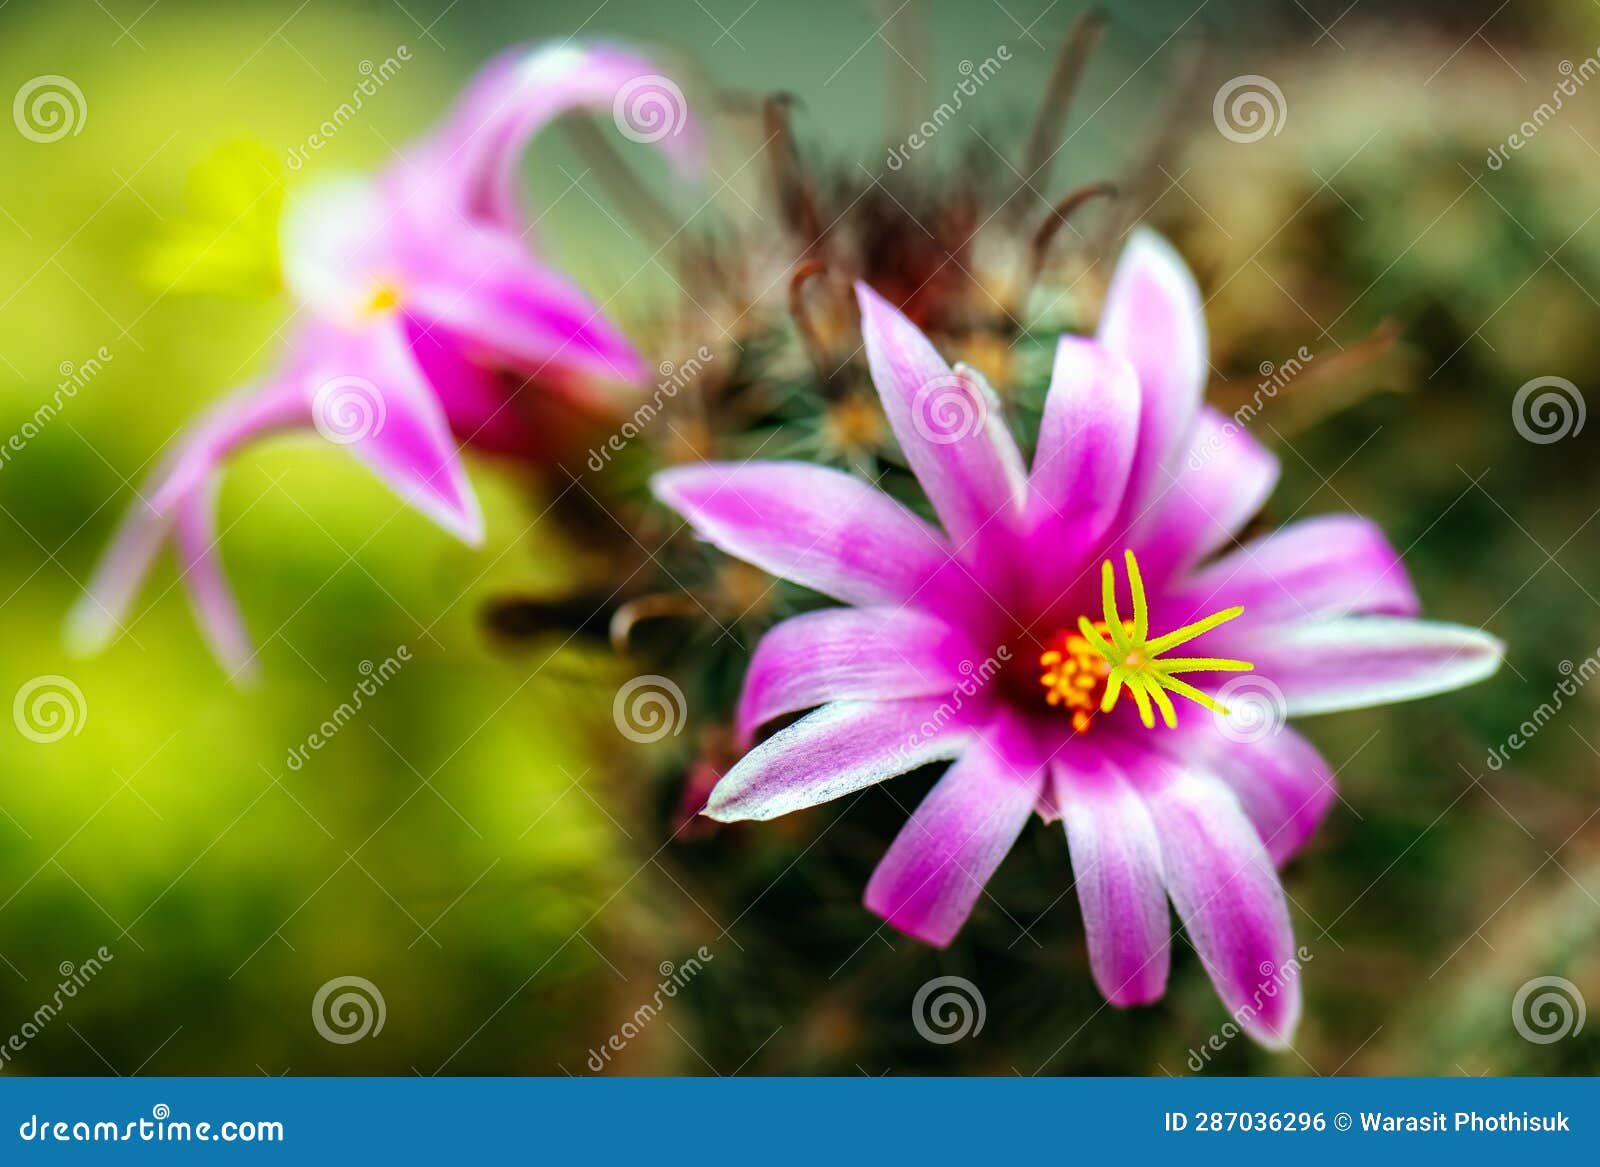 https://thumbs.dreamstime.com/z/mammillaria-benneckei-type-cactus-hook-spines-there-tuberous-propagation-clump-together-group-blooming-close-up-287036296.jpg